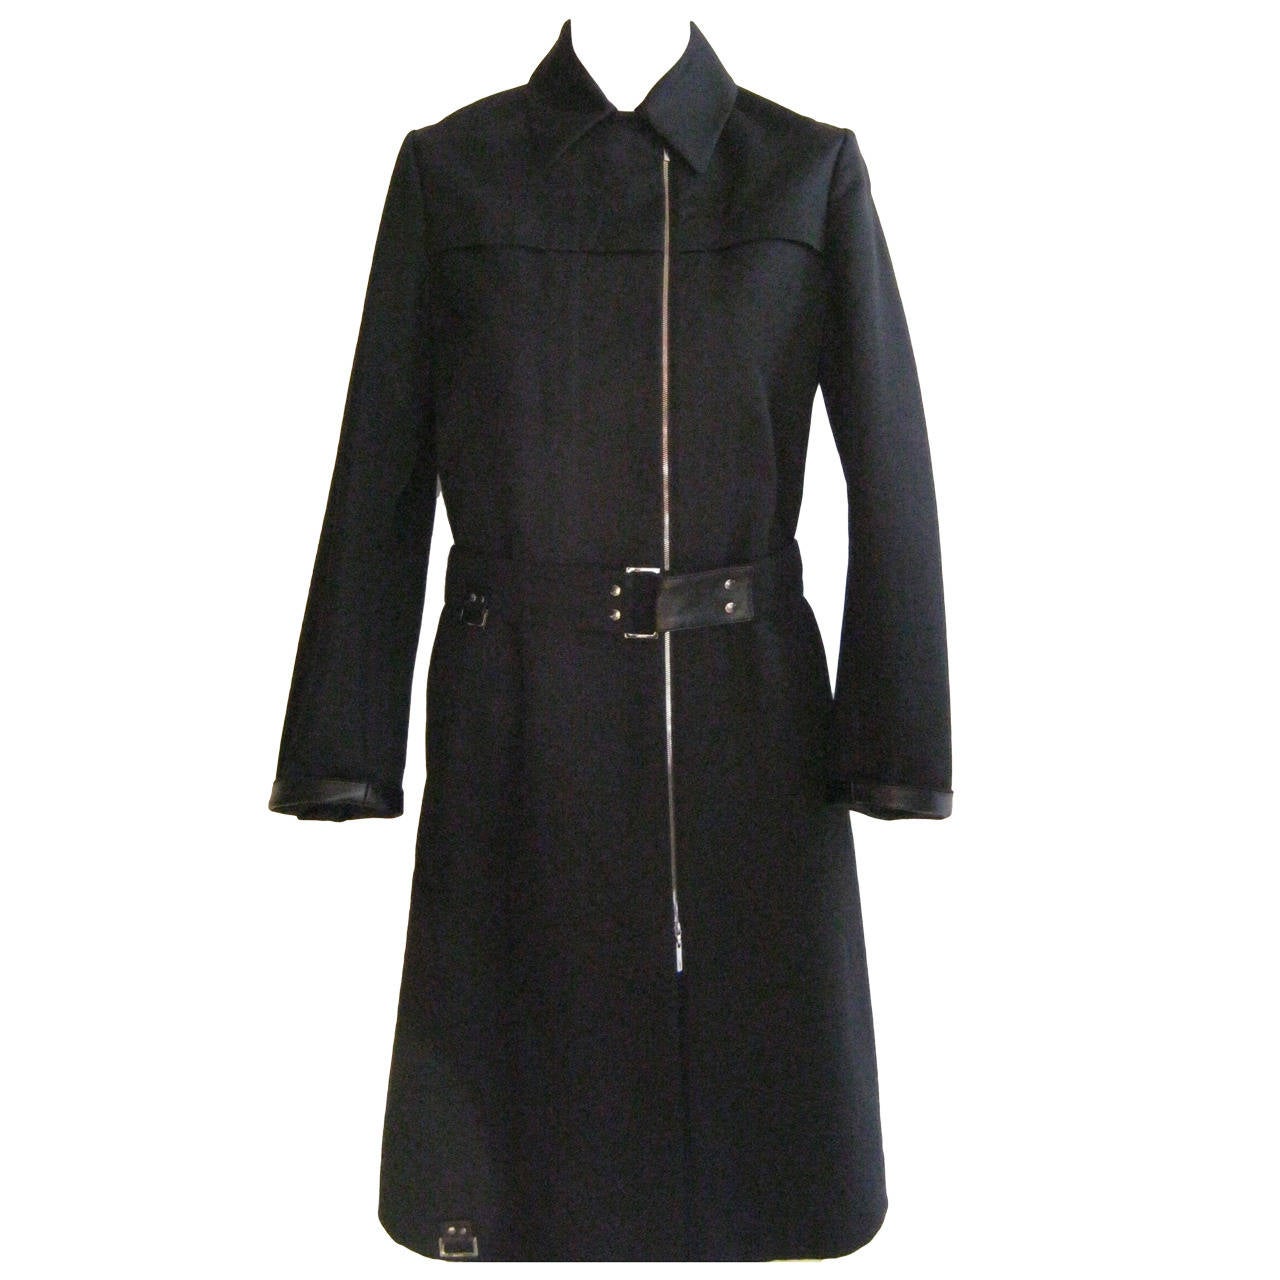 2000s Gucci Classic Black Trench Coat (38) at 1stdibs